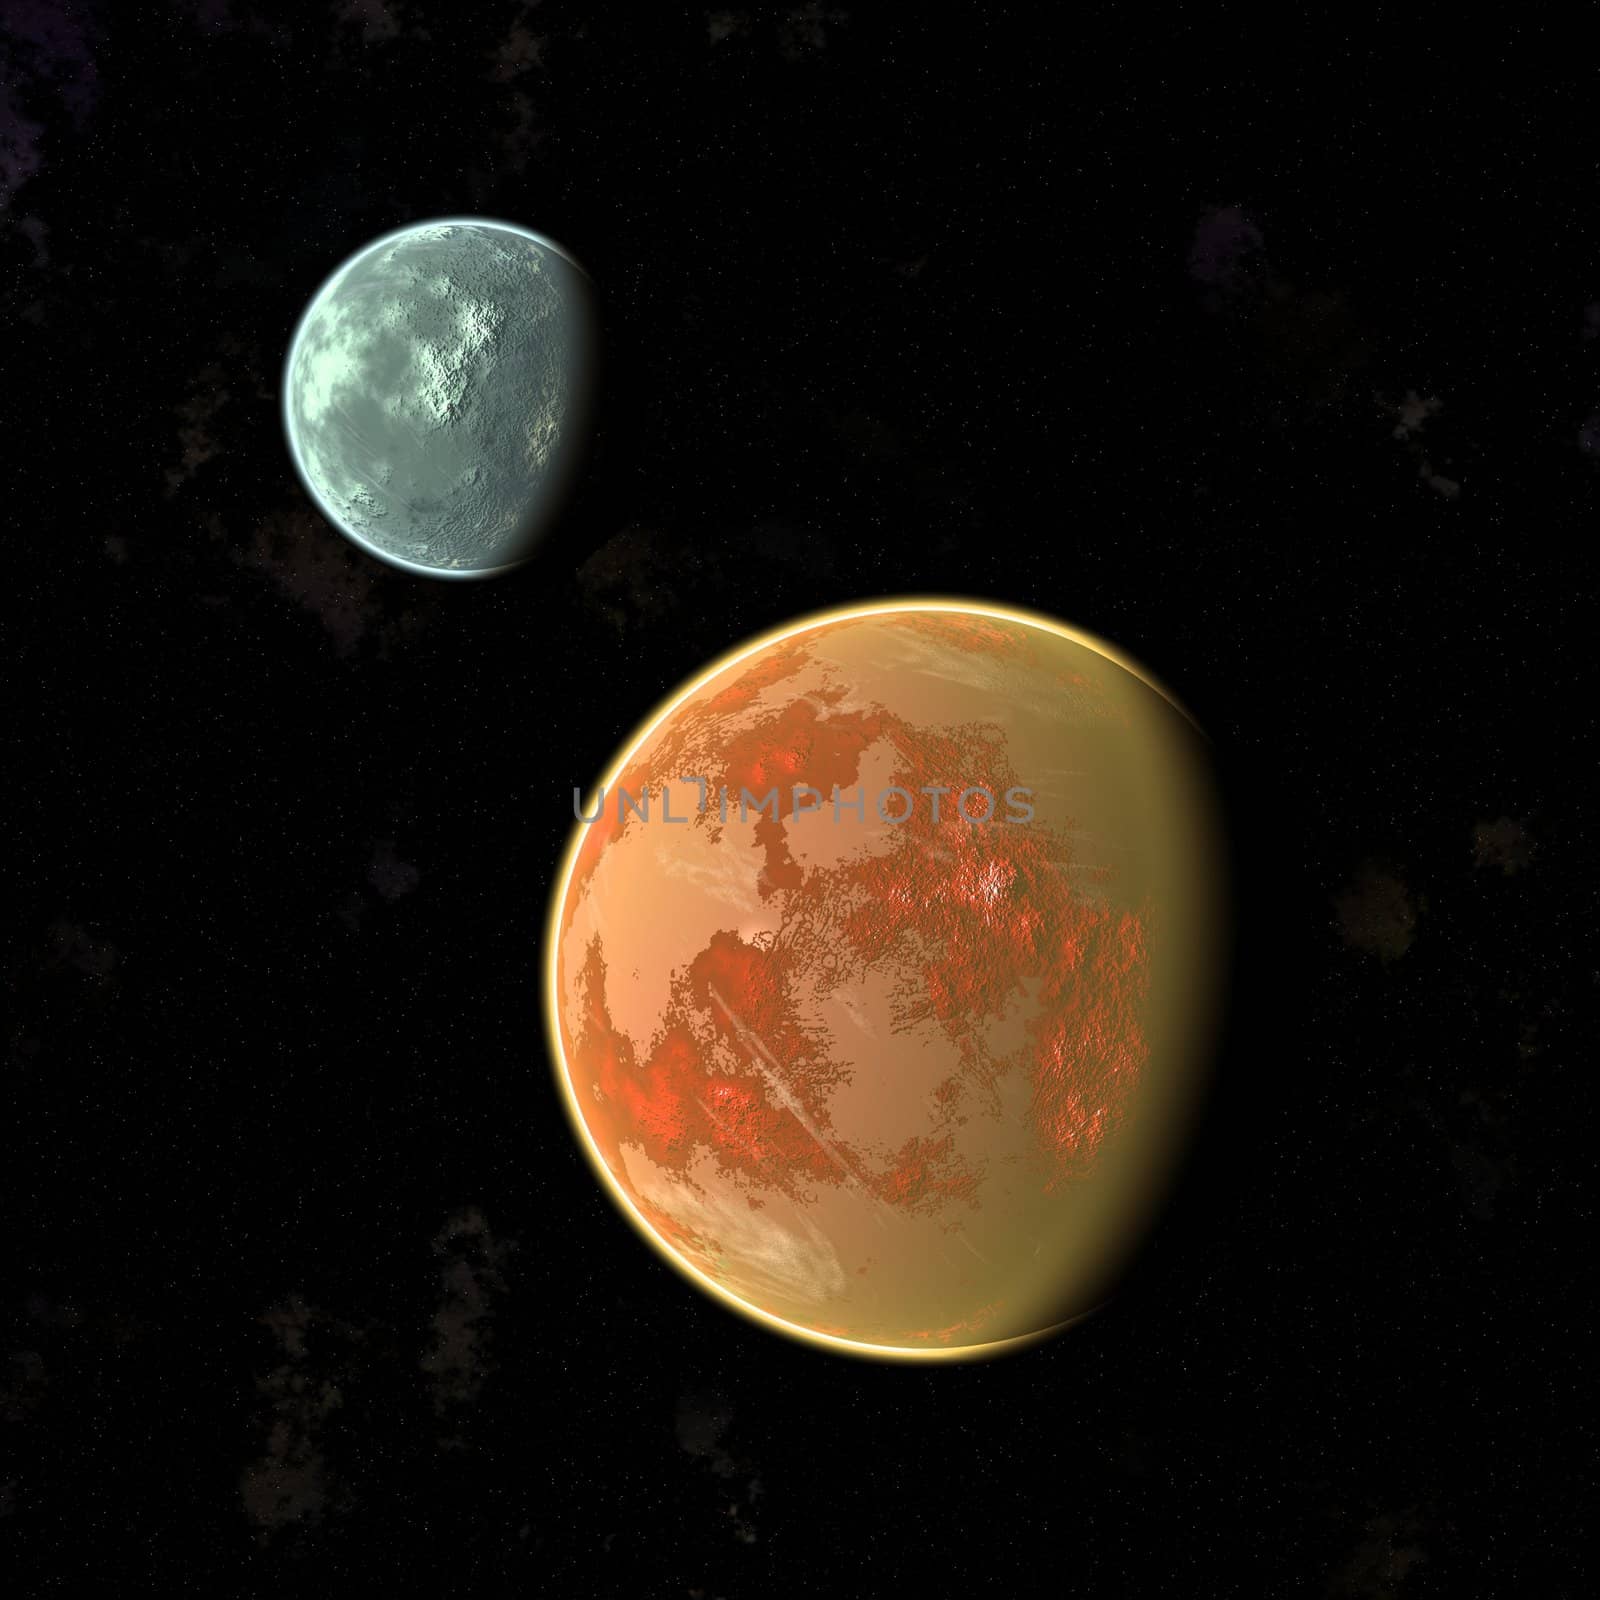 an image of two planets in the space